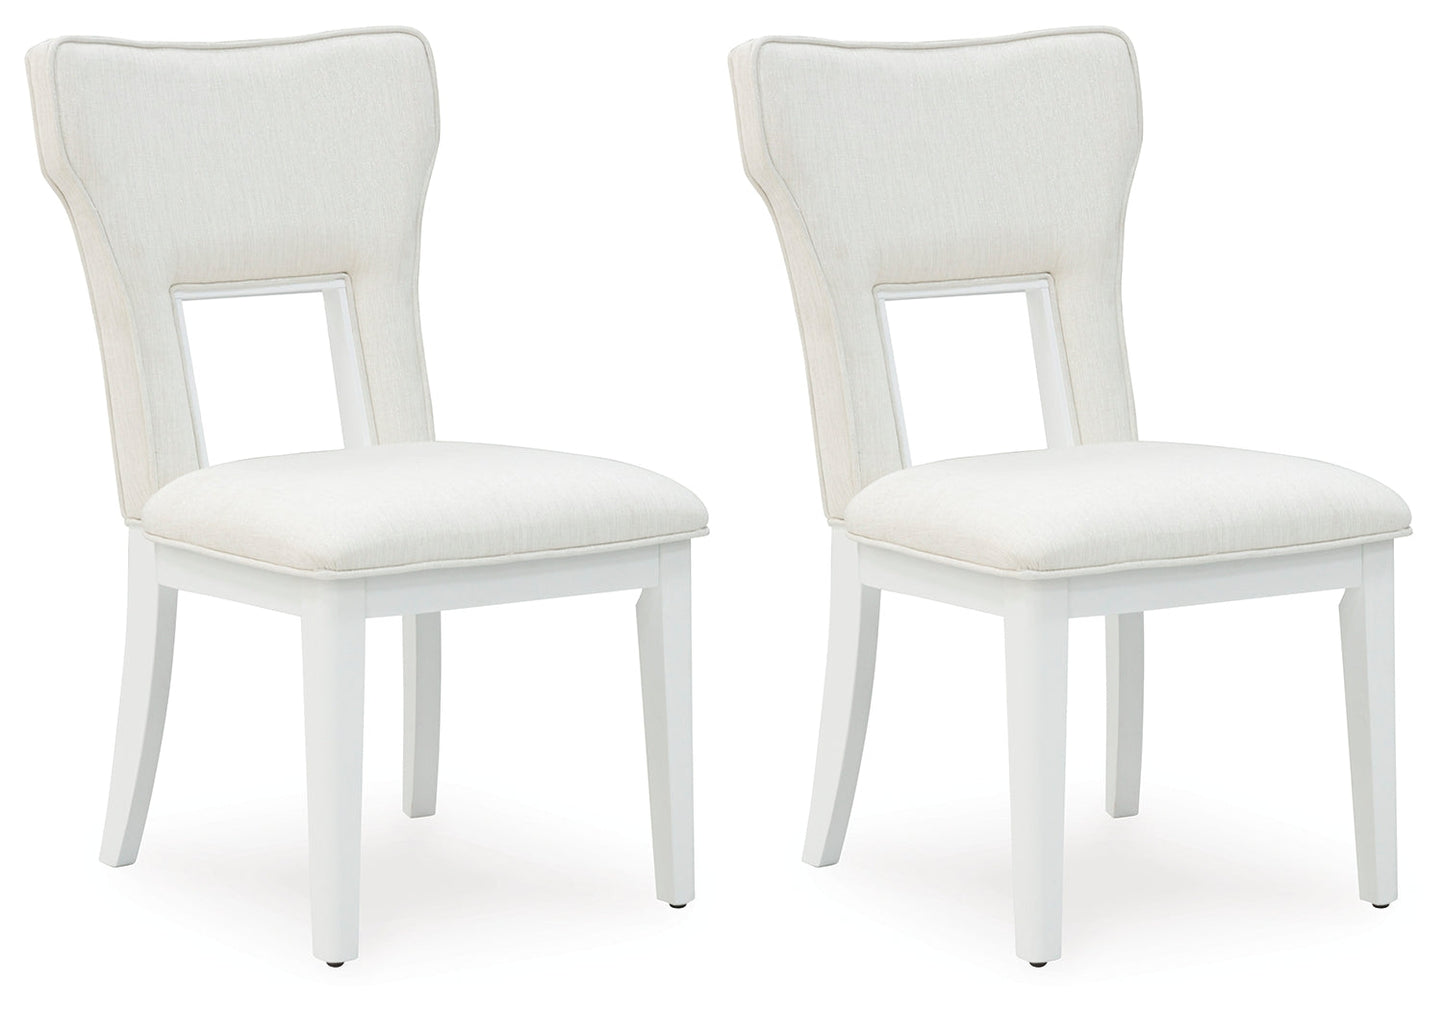 Chalanna White Dining Chair ( Set of 2)